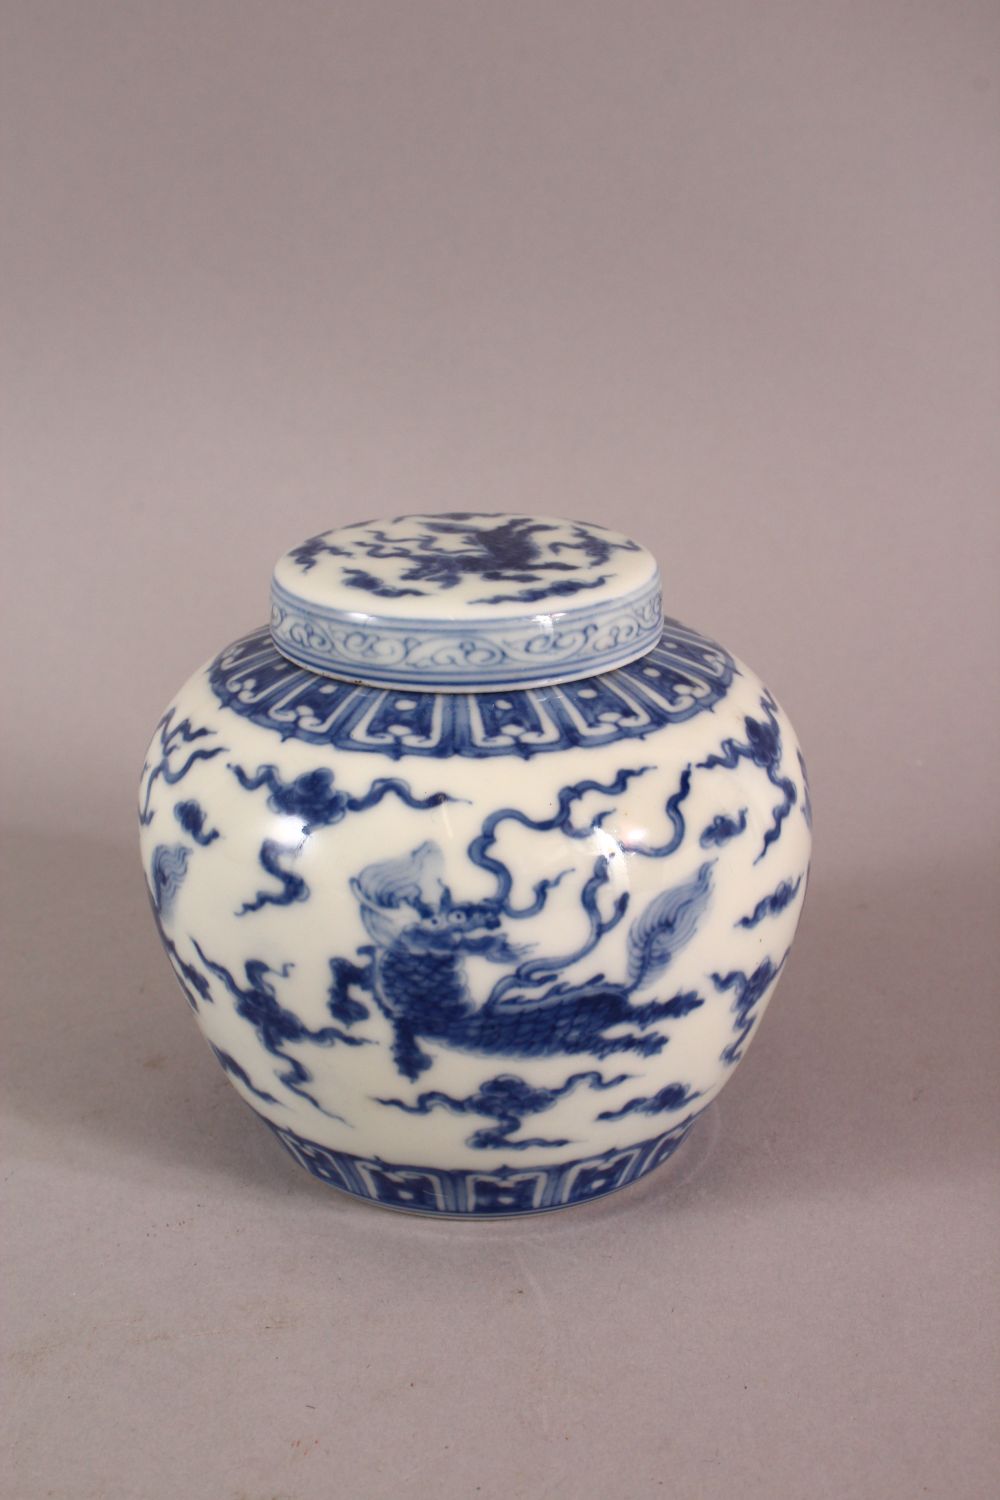 A CHINESE BLUE & WHITE PORCELAIN JAR & COVER, with decoration of kylin and clouds, base with a mark, - Image 2 of 7